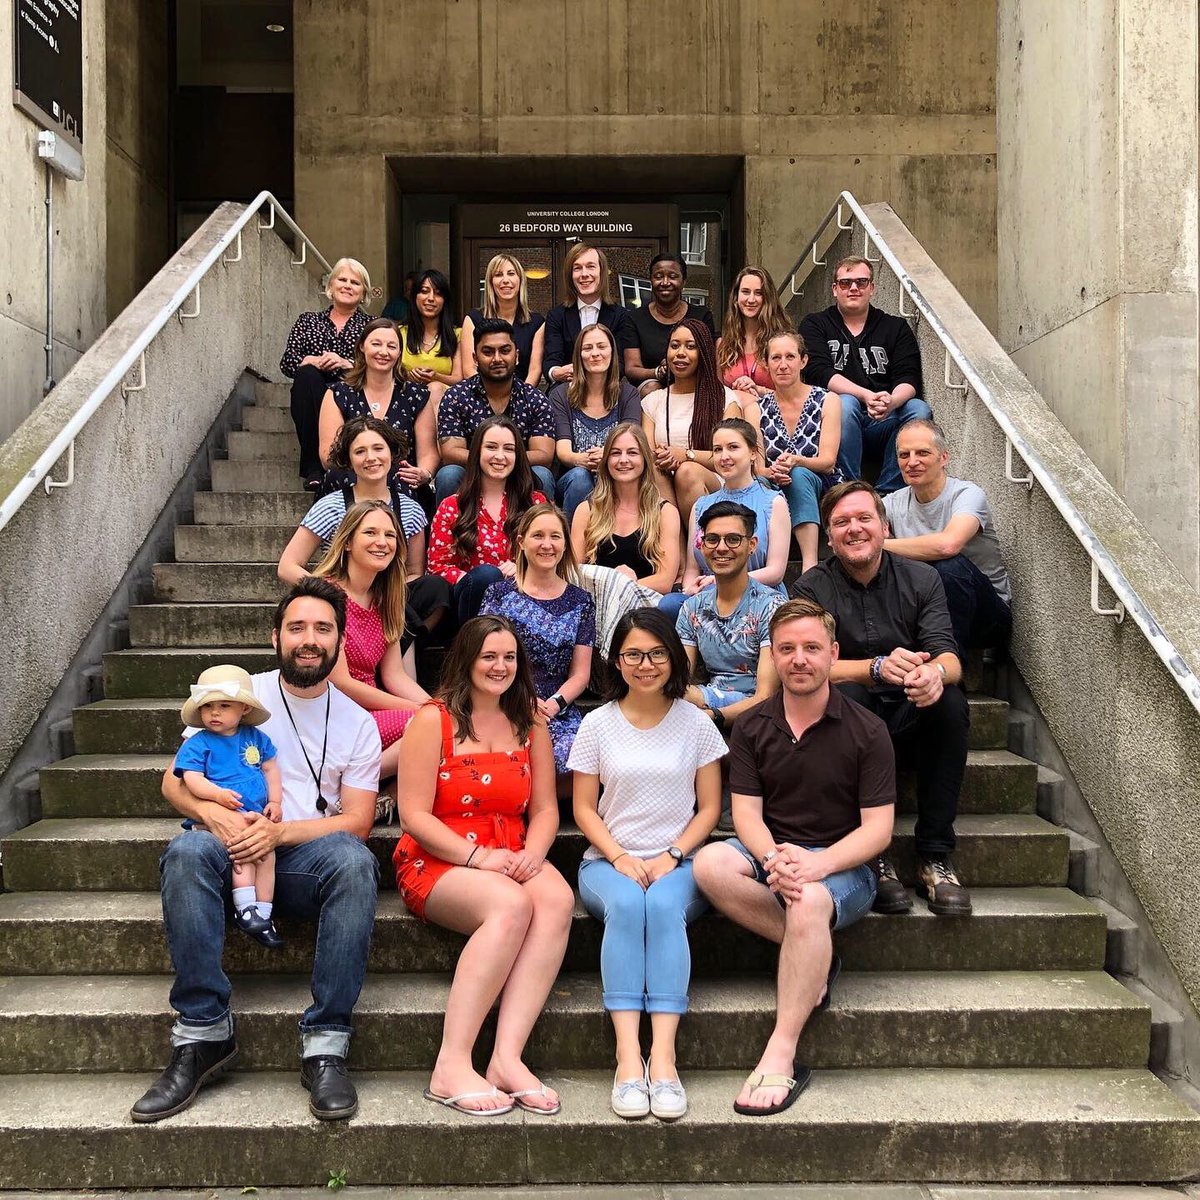 What a whirlwind 3 years it has been! I can’t quite believe my time at UCL has come to an end. I couldn’t have asked for a better group to share this experience with and I am very proud of us all 🥰 Now on to the next chapter as a qualified EP! 🙌🏻 #ucl #EducationalPsychologist